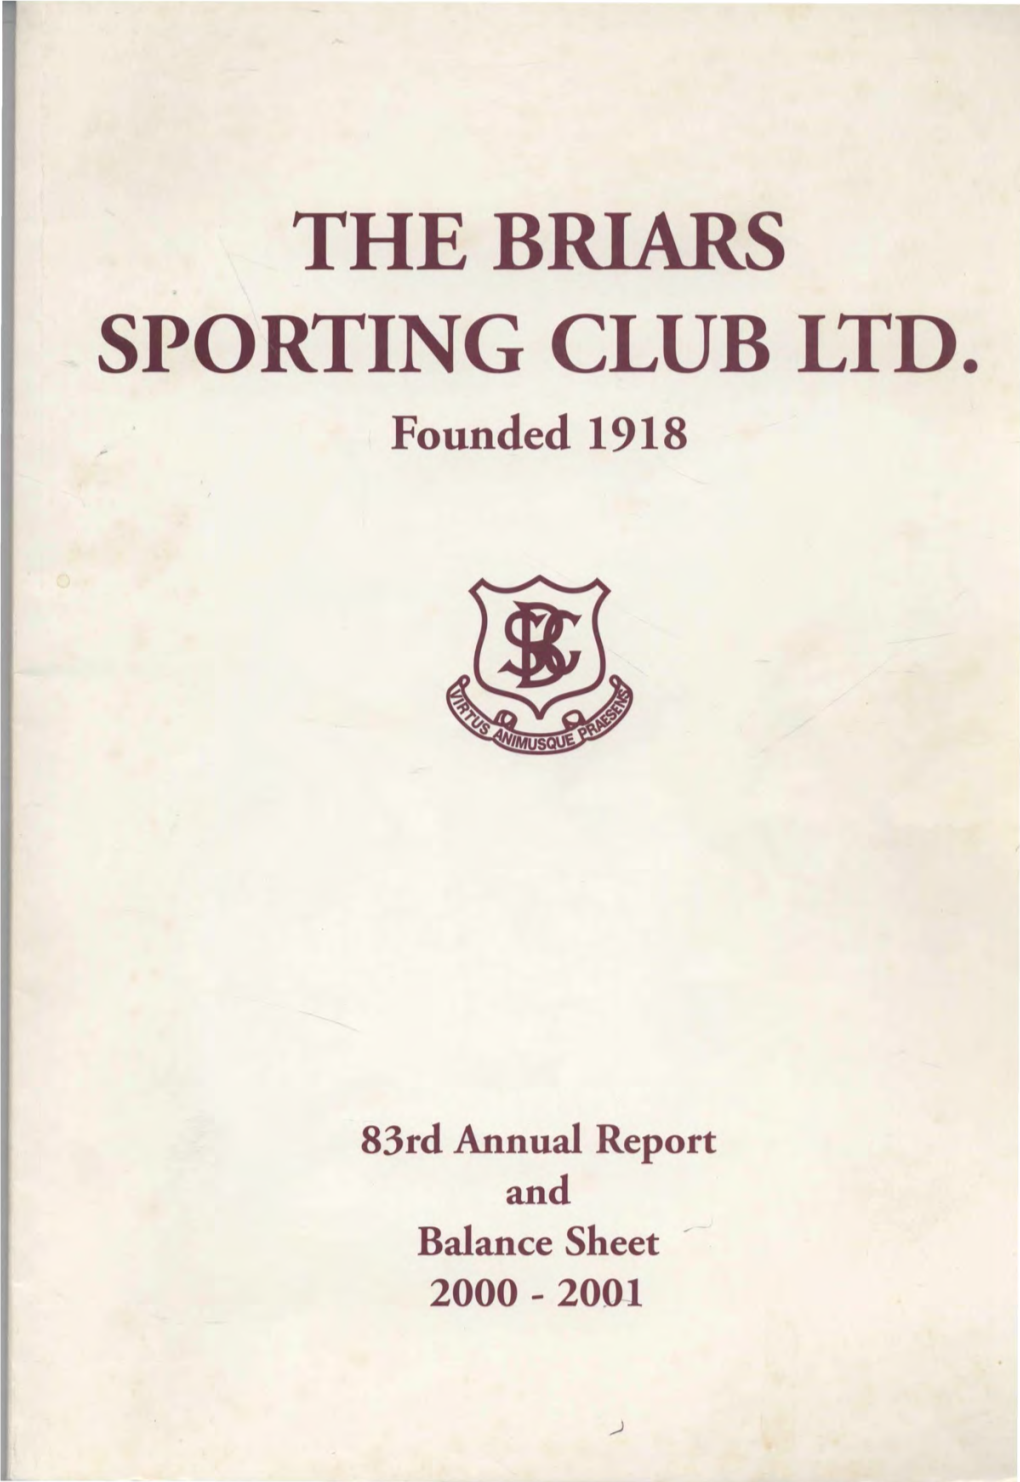 THE BRIARS SPORTING CLUB LTD. Founded 1918